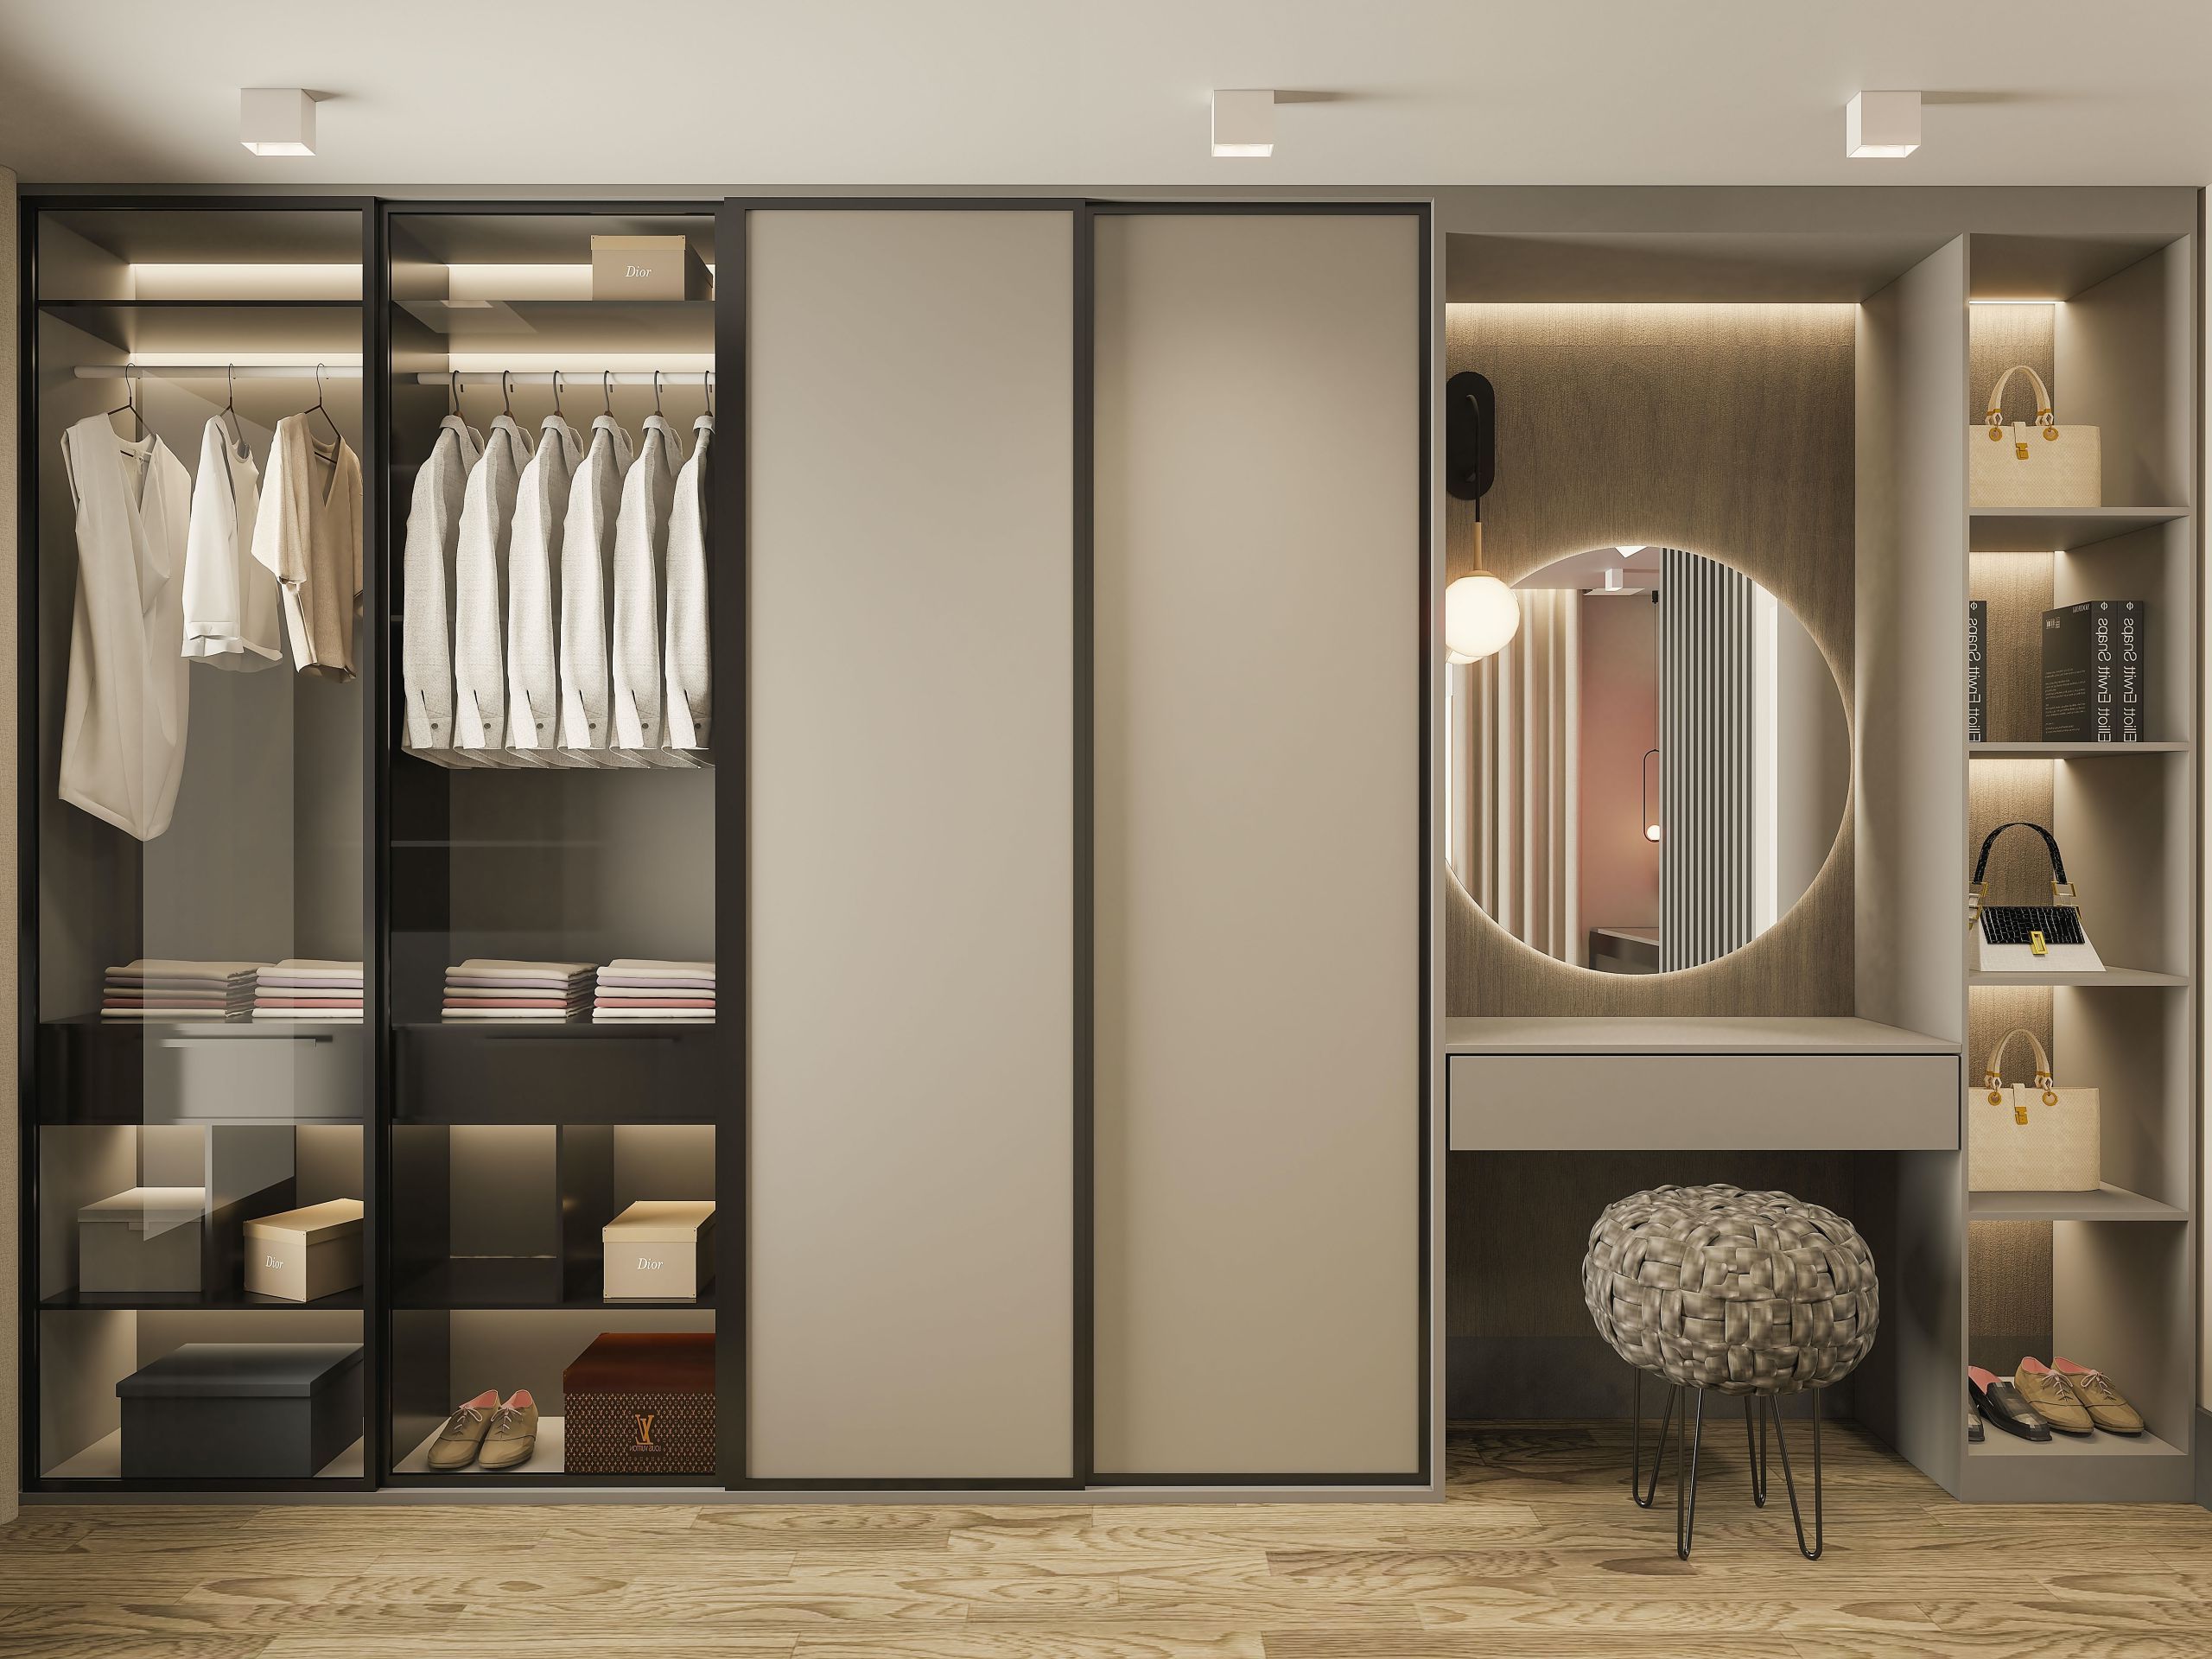 Master Bedroom Wardrobe Design With Dressing Table Regarding Wardrobes And Dressing Tables (View 18 of 20)